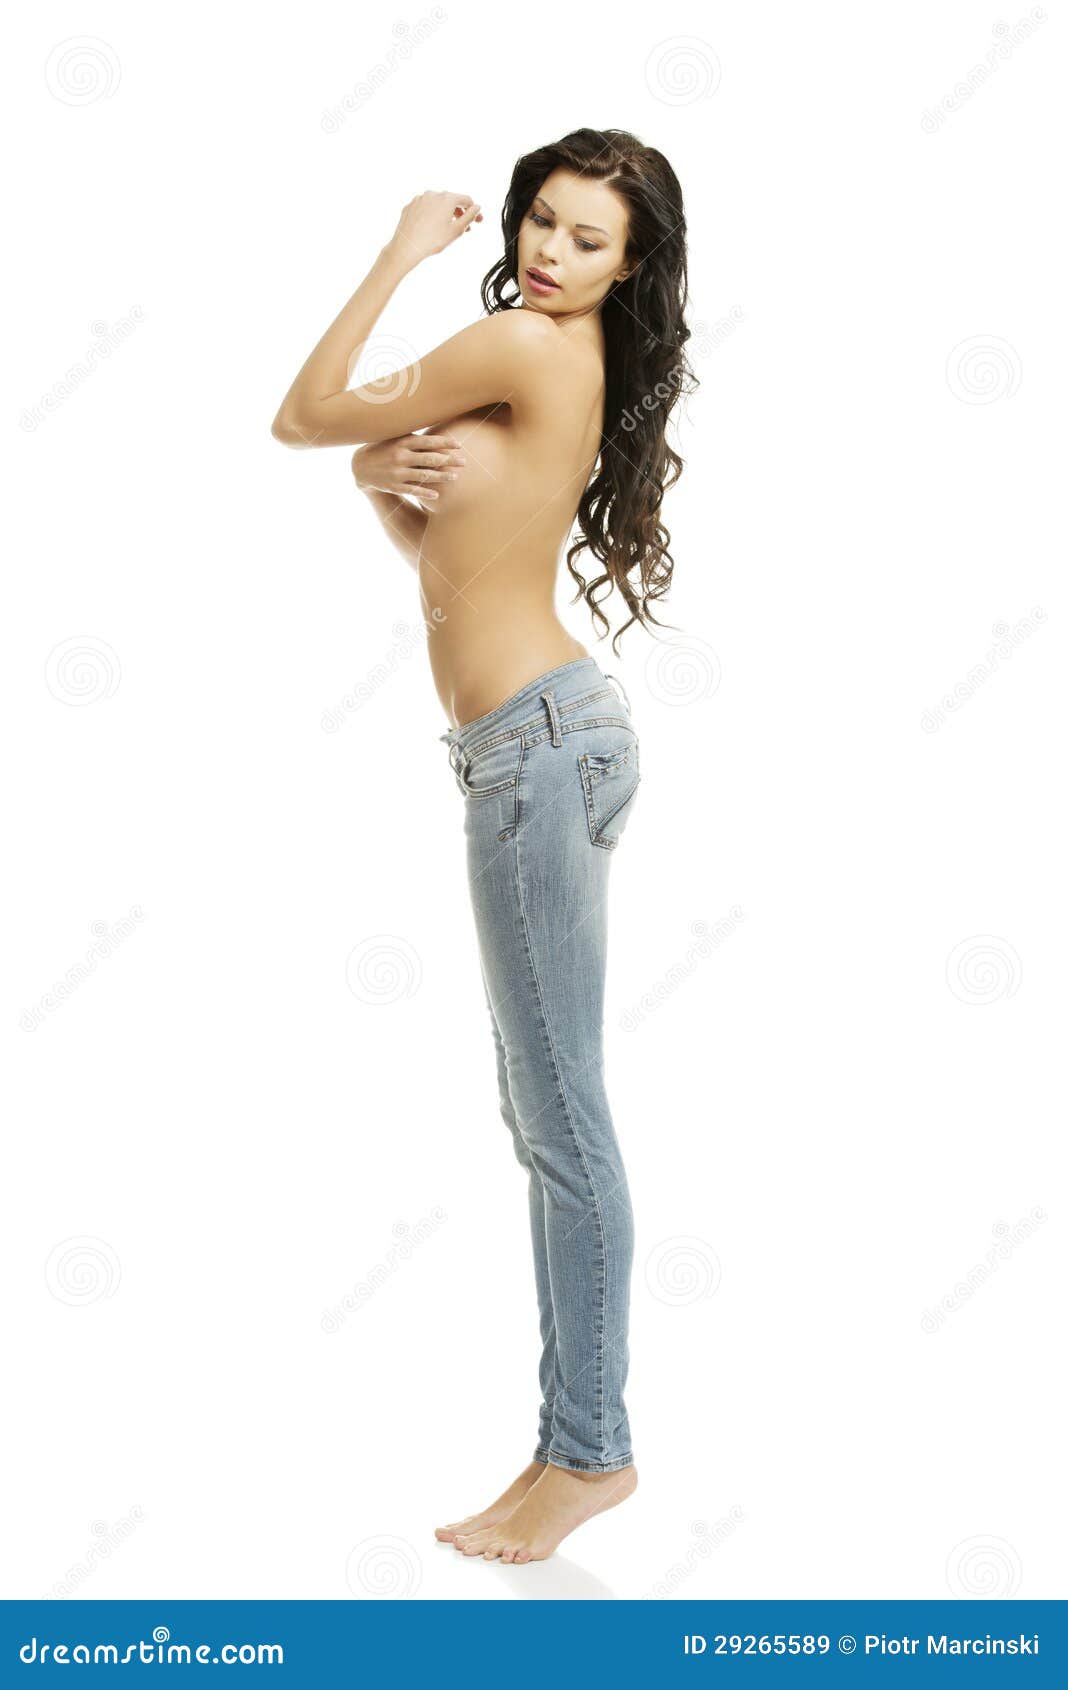 Hot Topless In Jeans